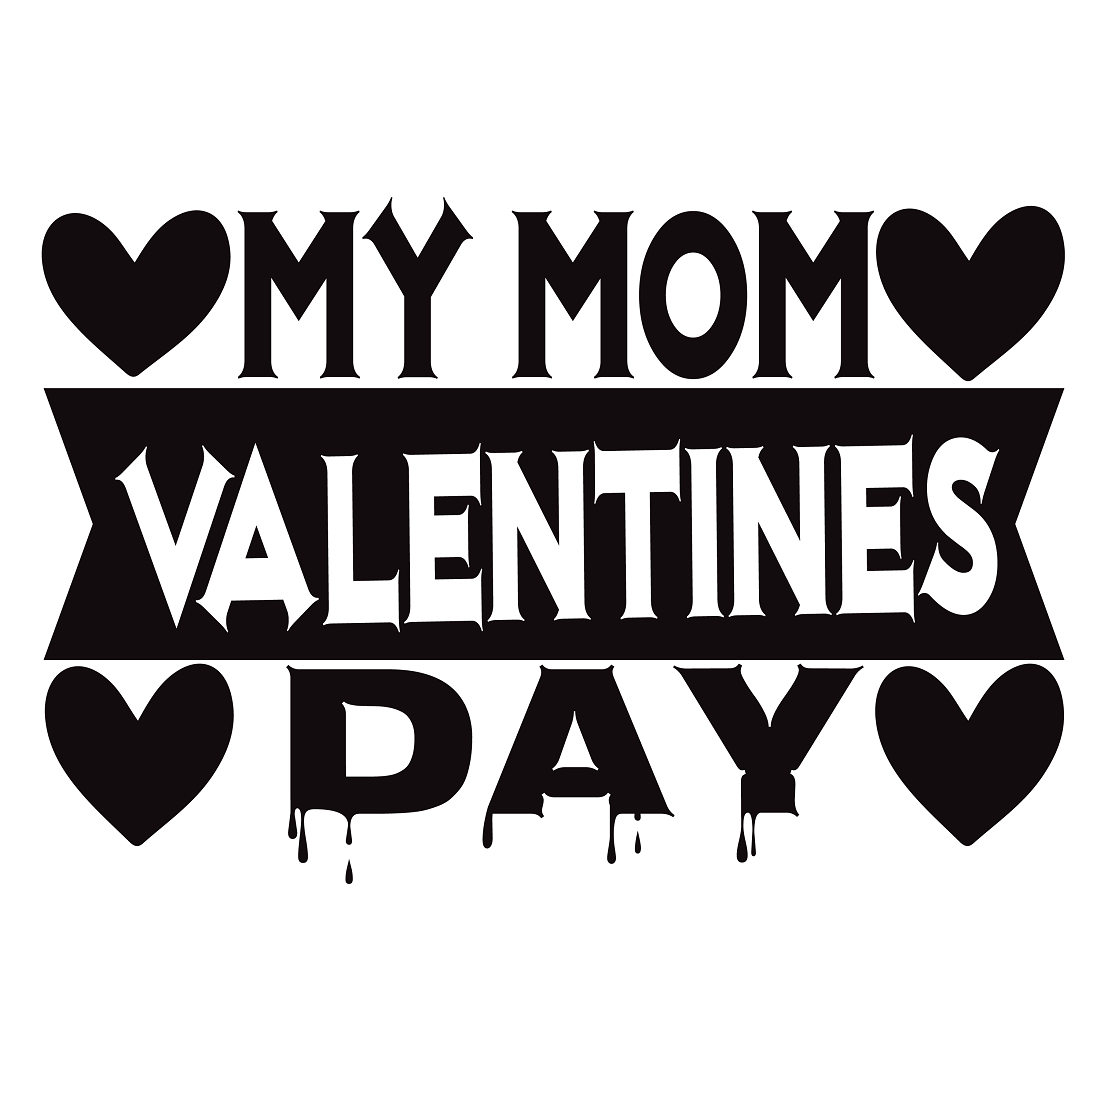 My Mom valentines day preview image.